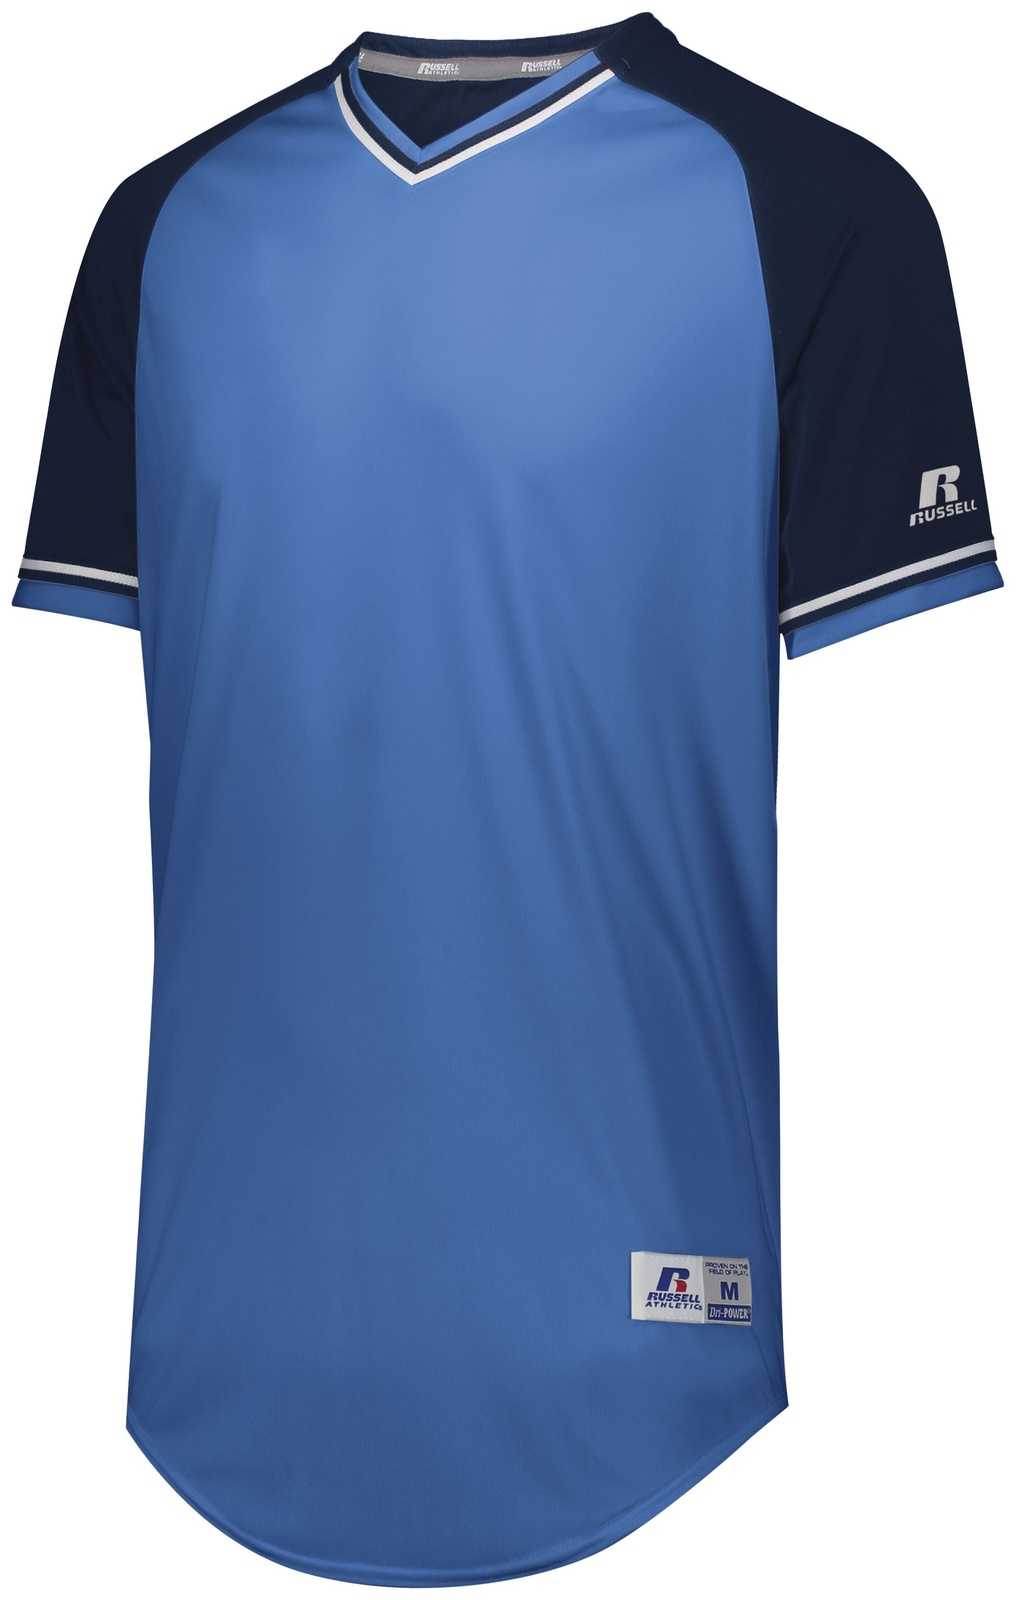 Russell R01X3M Classic V-Neck Jersey - Columbia Blue Navy White - HIT a Double